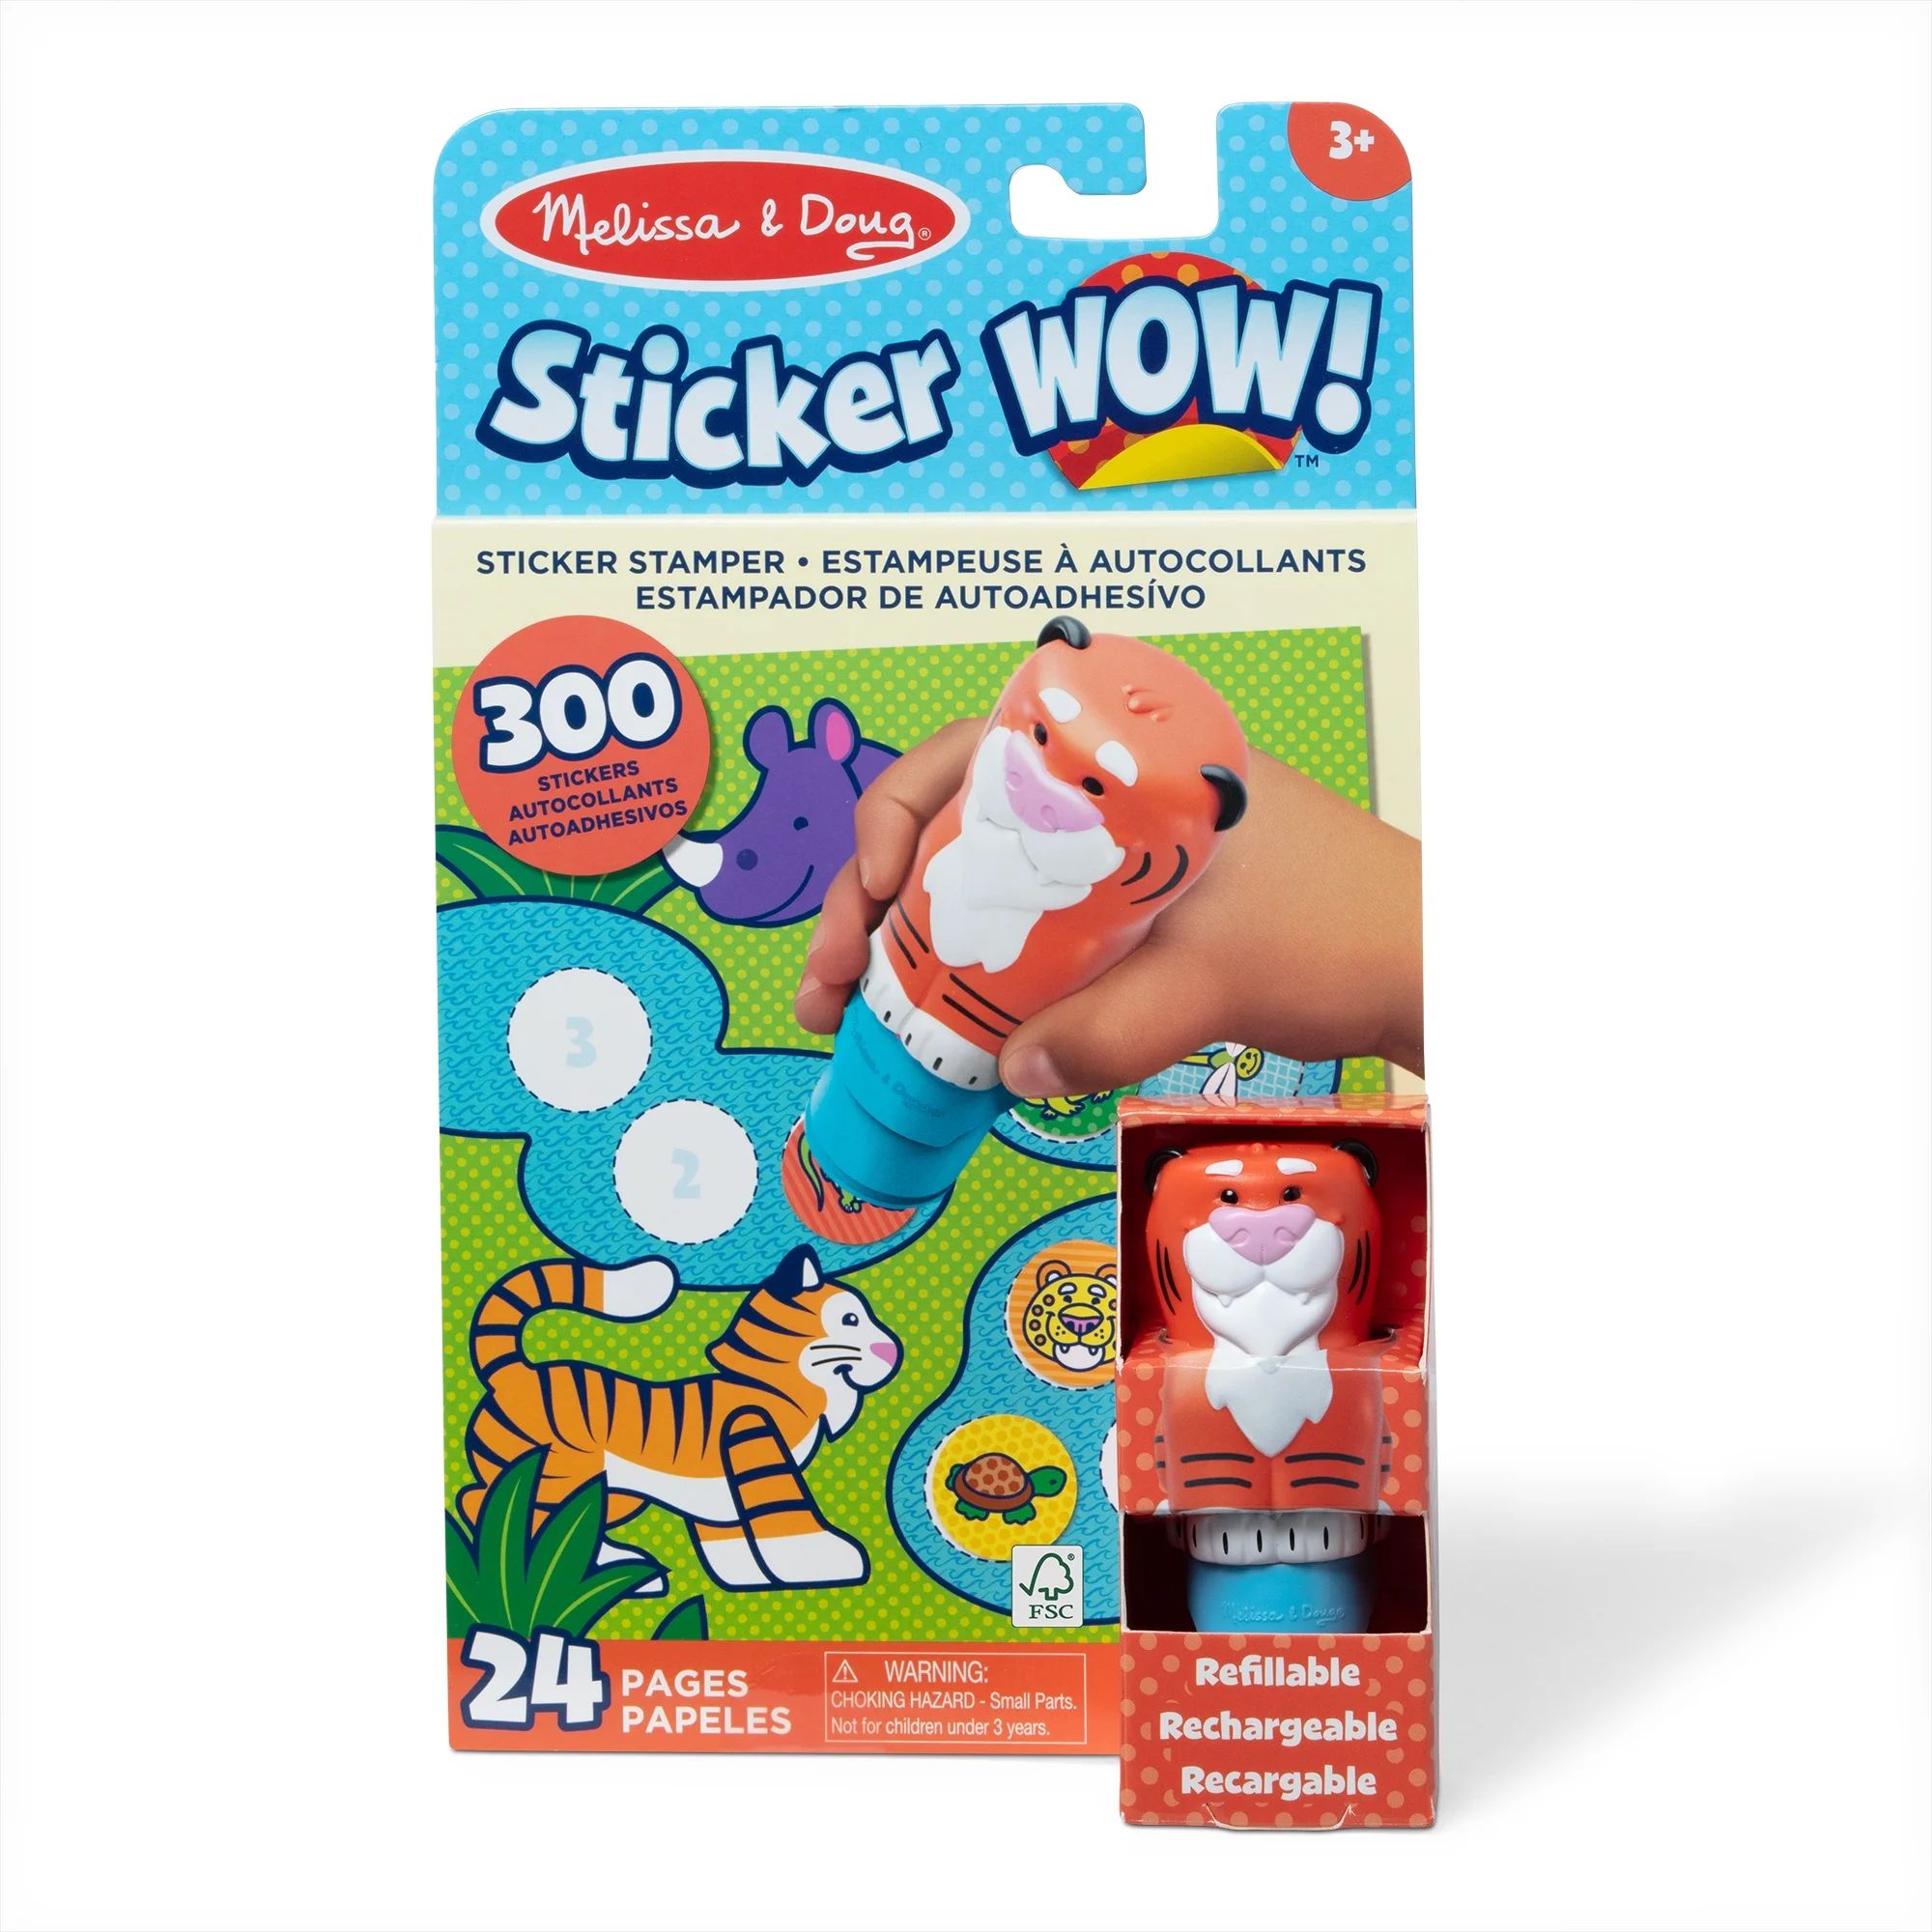 Melissa & Doug Sticker WOW!™ 24-Page Activity Pad and Sticker Stamper, 300 Stickers, Arts and C... | Walmart (US)